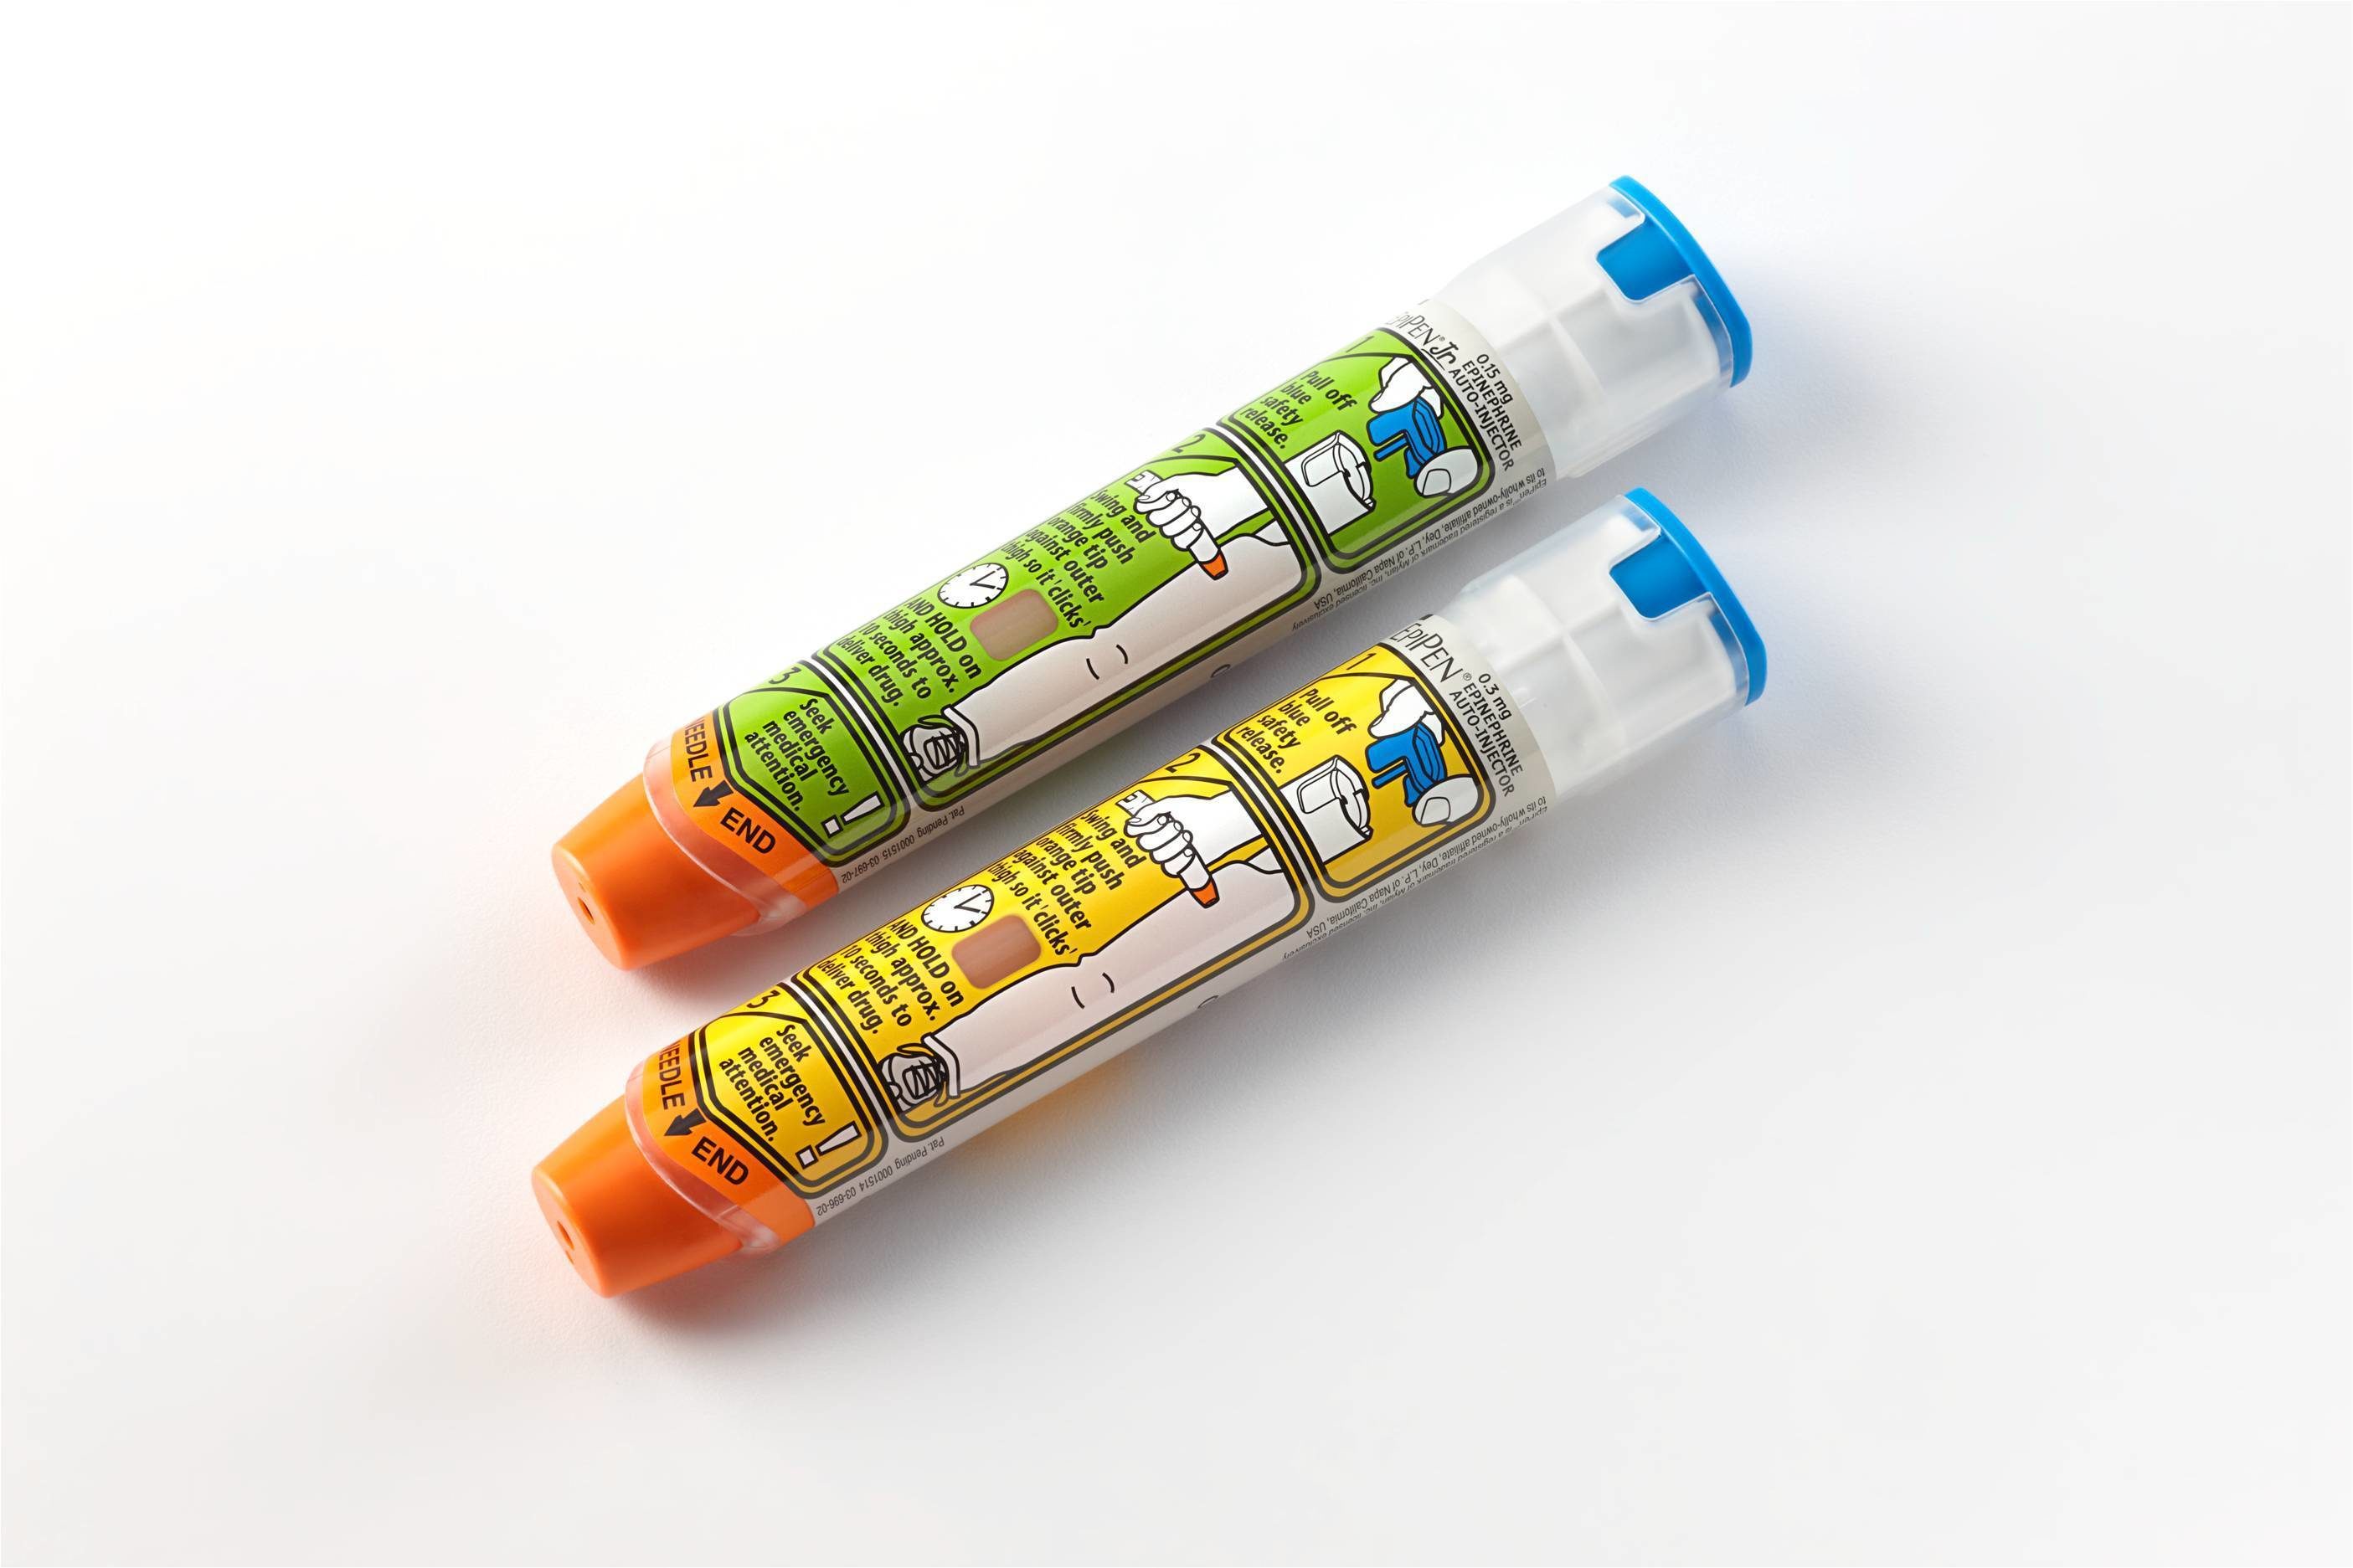 epipen-manufacturer-settles-with-oregon-attorney-general